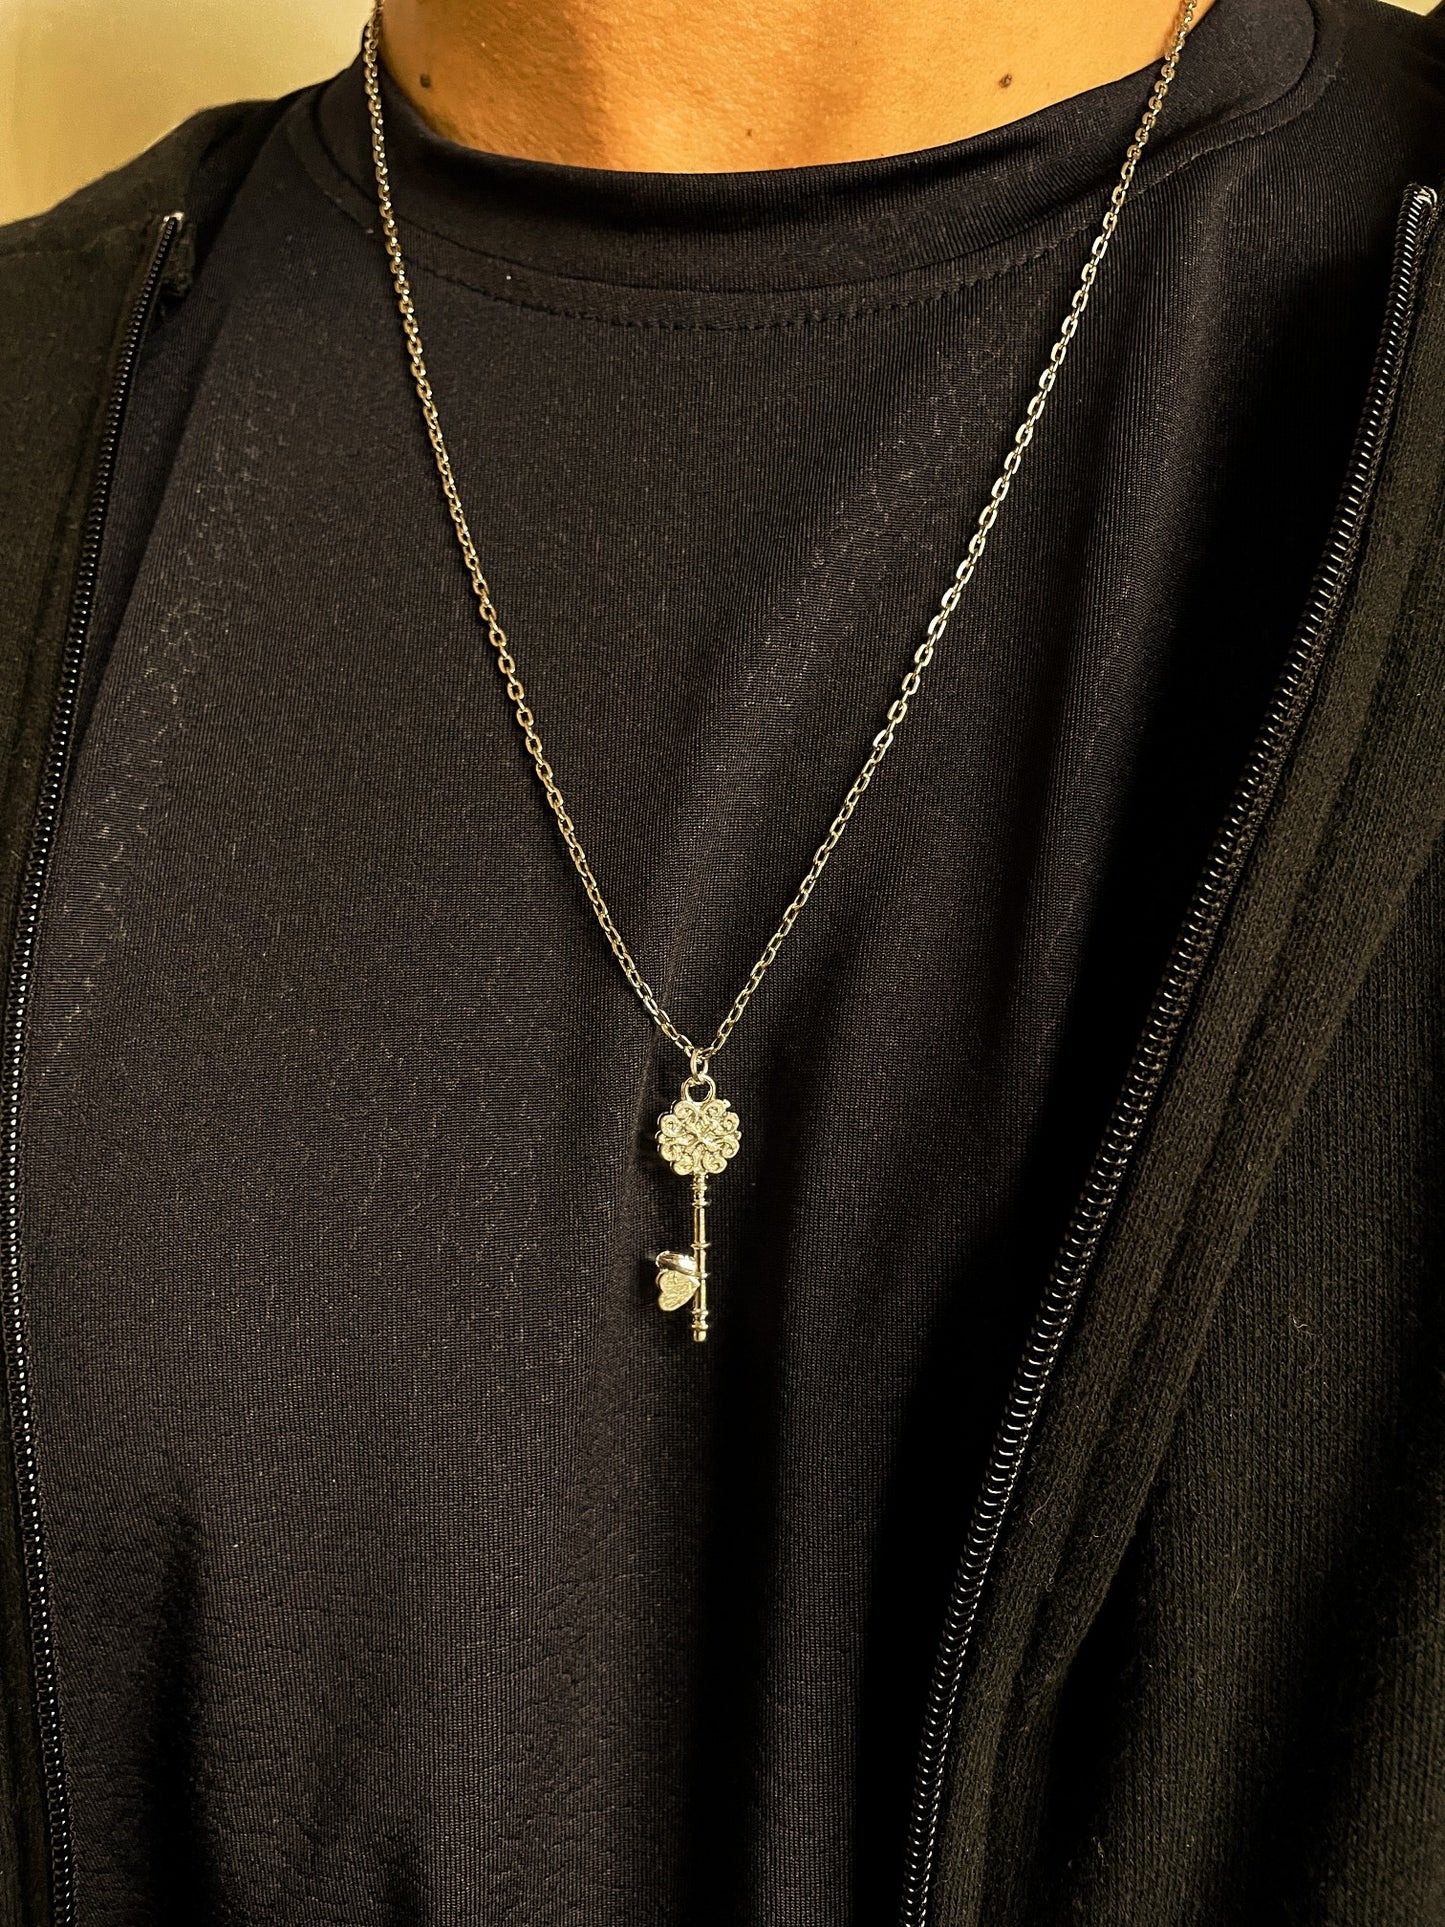 Silver Skeleton Key Pendant With Chain